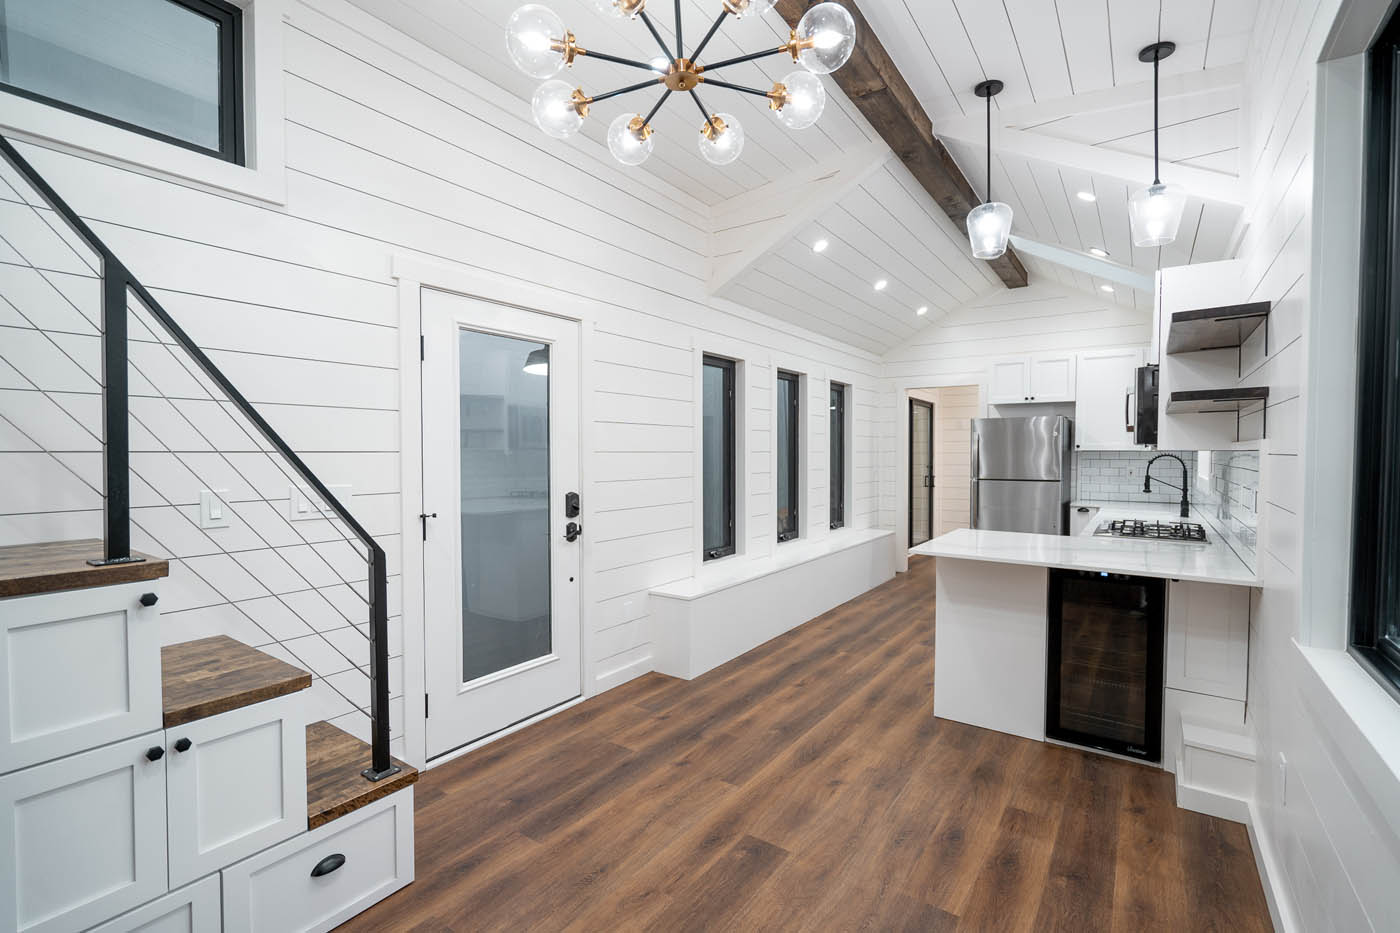 A modern home with dark floors and white kitchen cabinets, provided by one of the best McKinney / Denton tiny house companies.